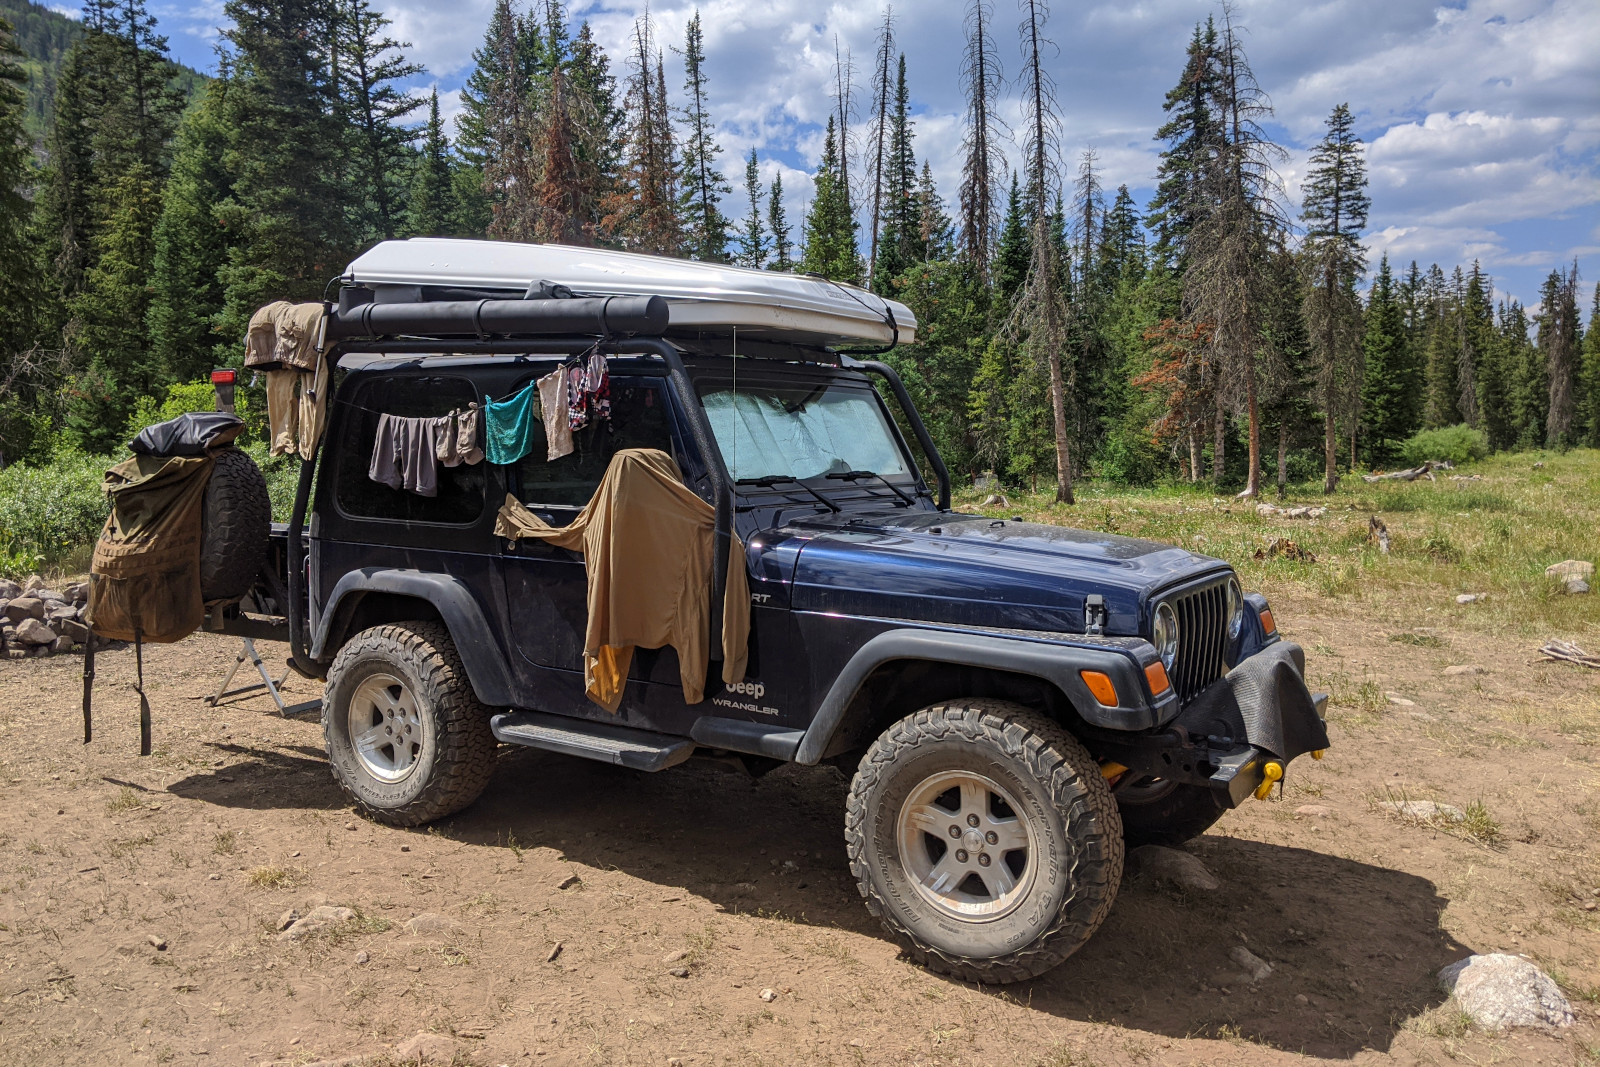 Wet clothes drying on a Jeep Wrangler